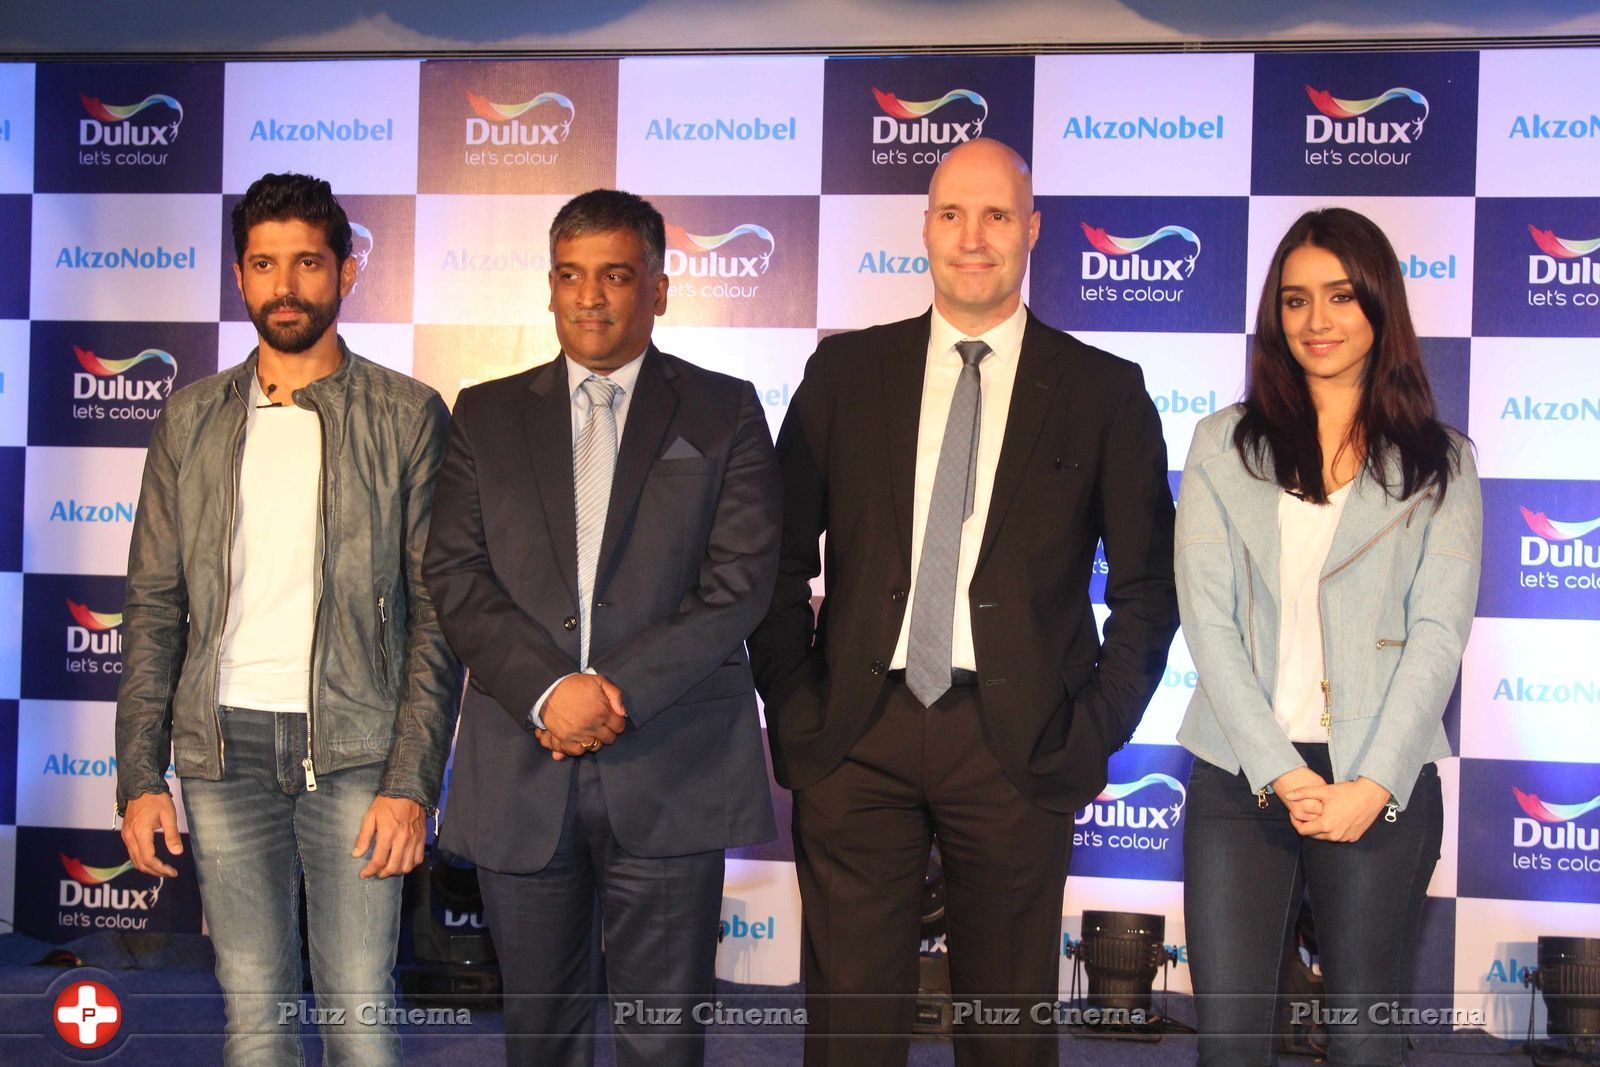 Farhan Akhtar and Shraddha Kapoor at the launch of Dulux new Color Range Photos | Picture 1445954